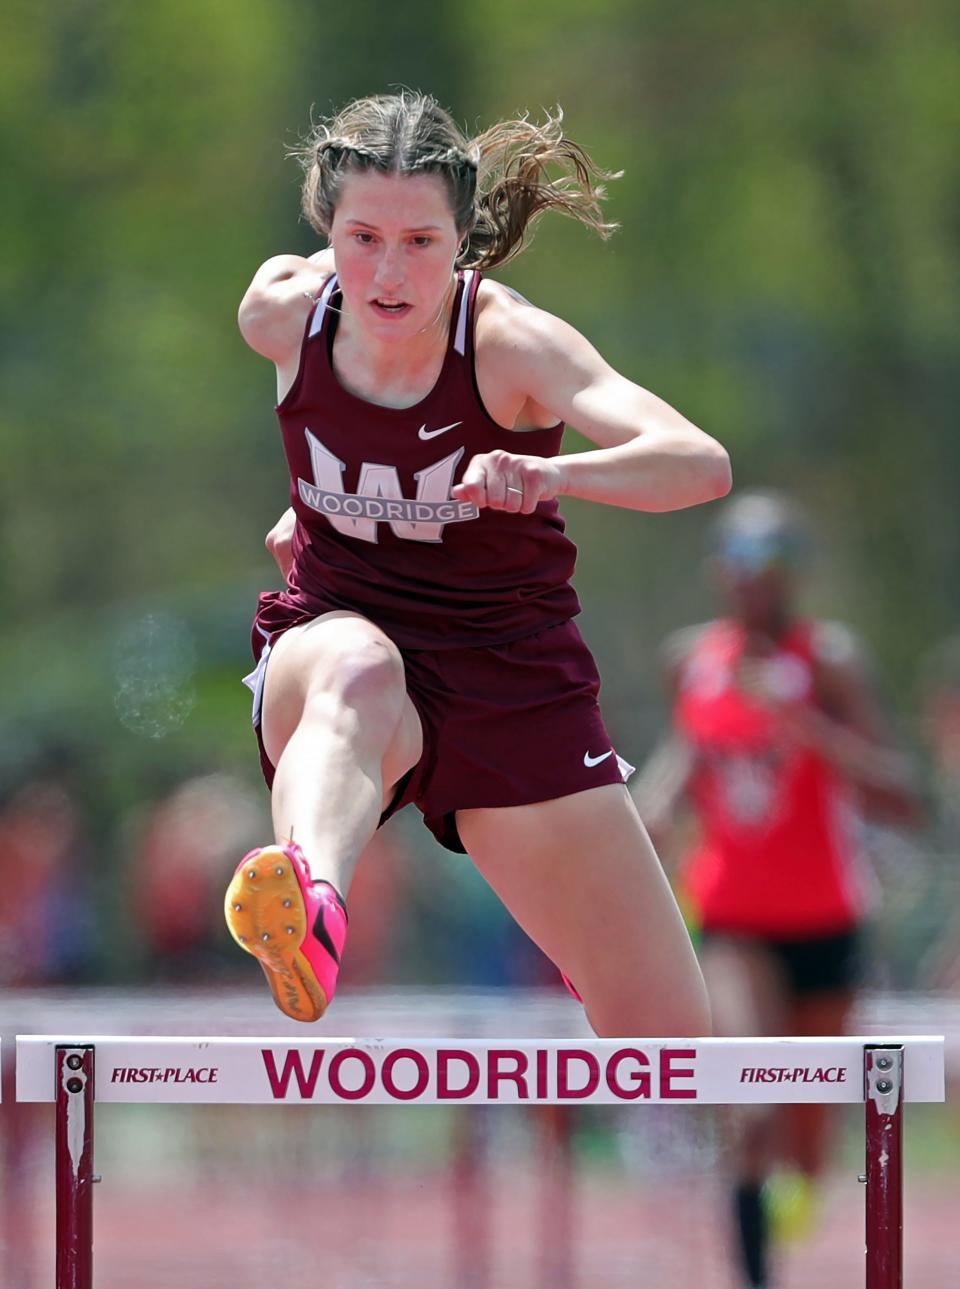 Anna Rorrer of Woodridge clears the final hurdle en route to a first-place finish in the girls 300-meter hurdles at the Woodridge Wrap-Up track meet on May 6 in Cuyahoga Falls.